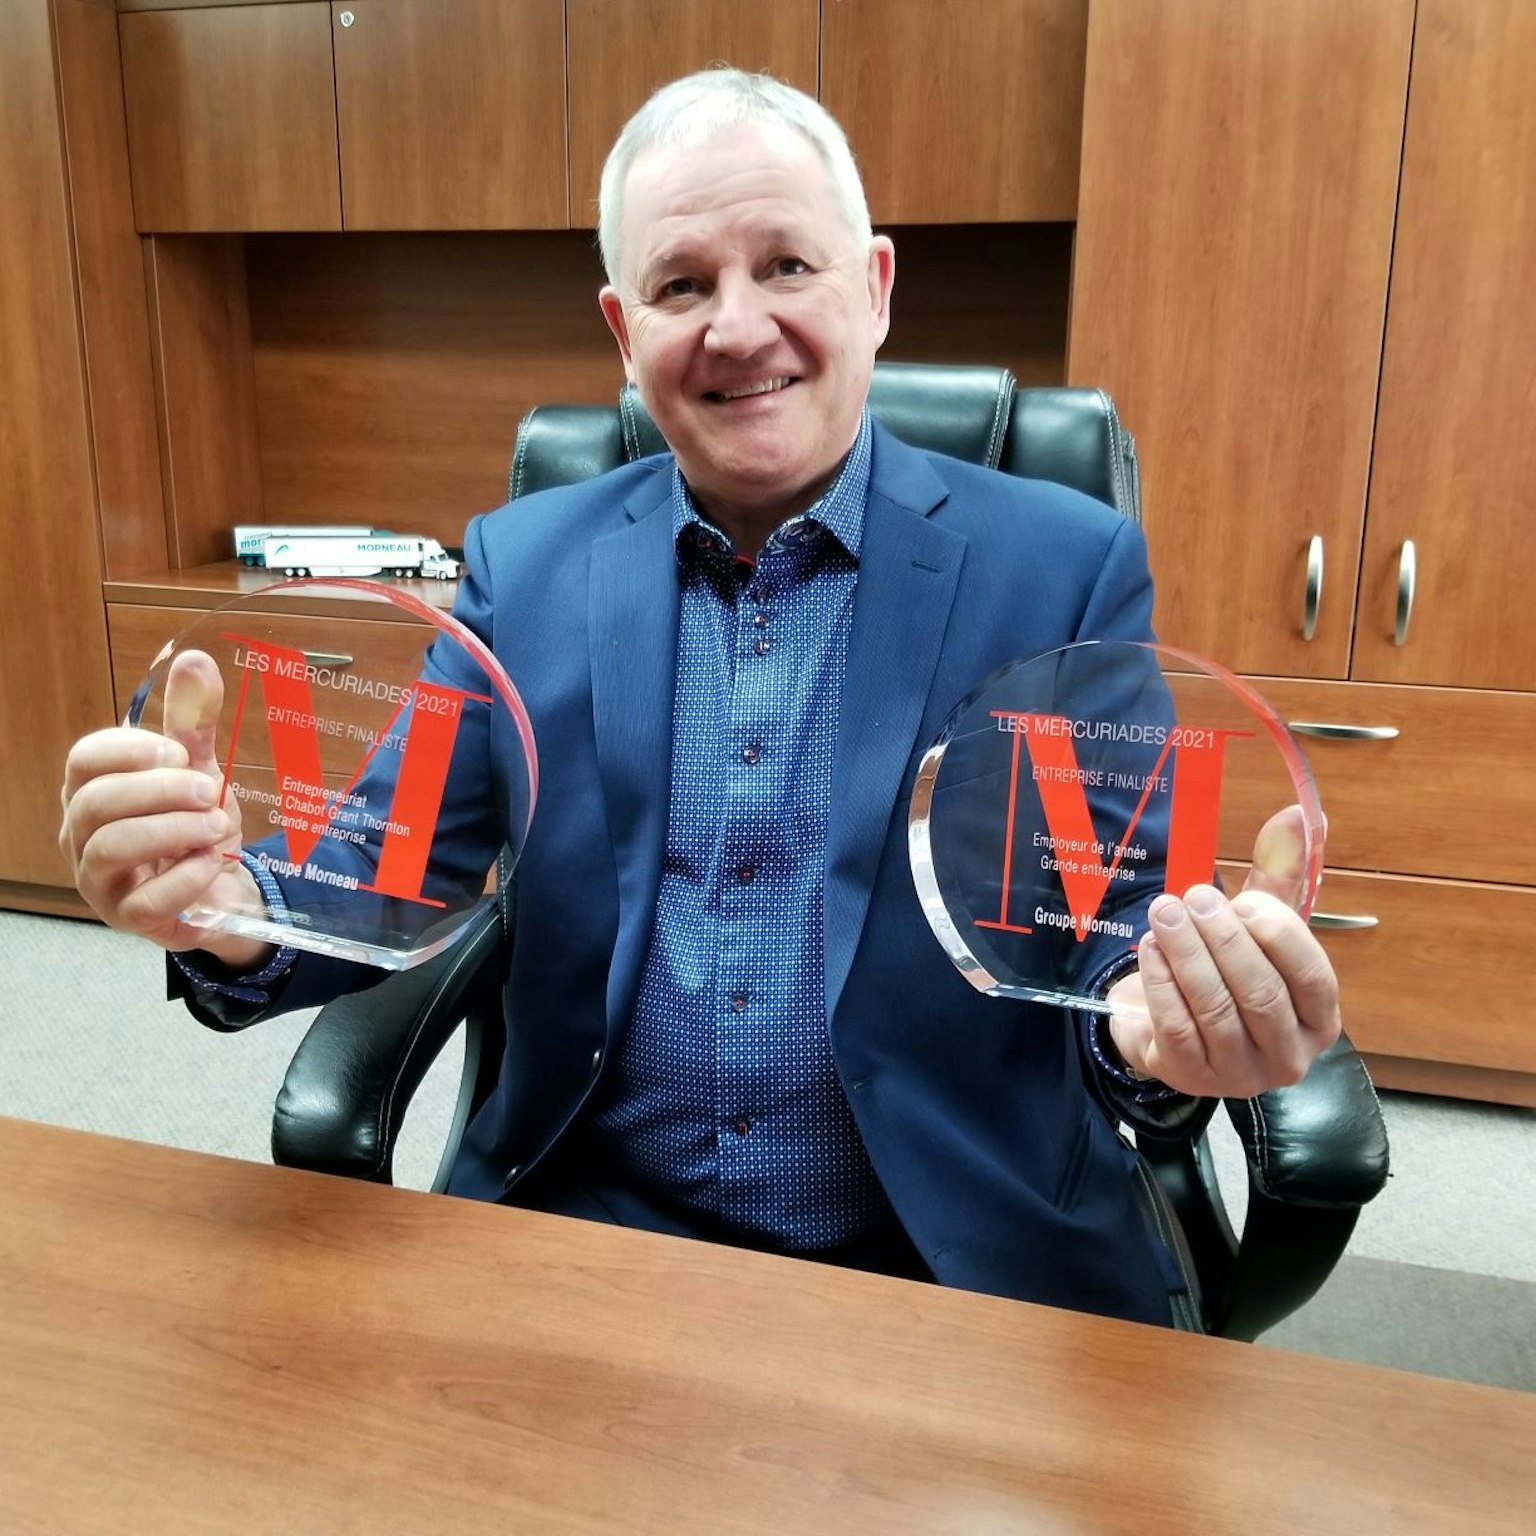 André Morneau proudly holding the two Mercuriades finalist awards